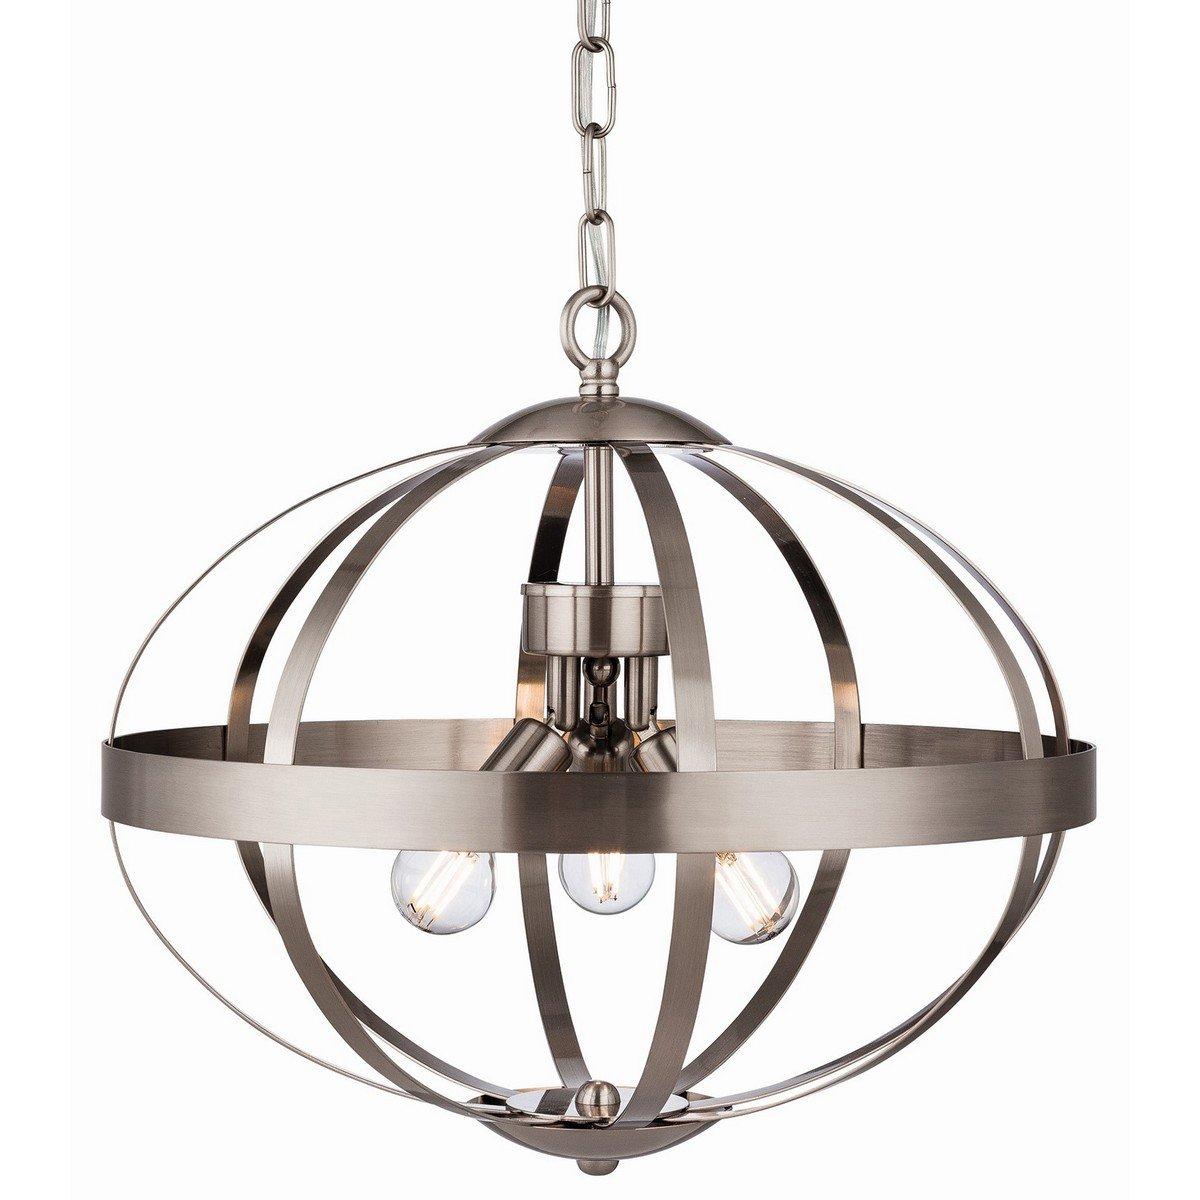 Healey 3 Light Cage Ceiling Pendant Brushed Steel E14